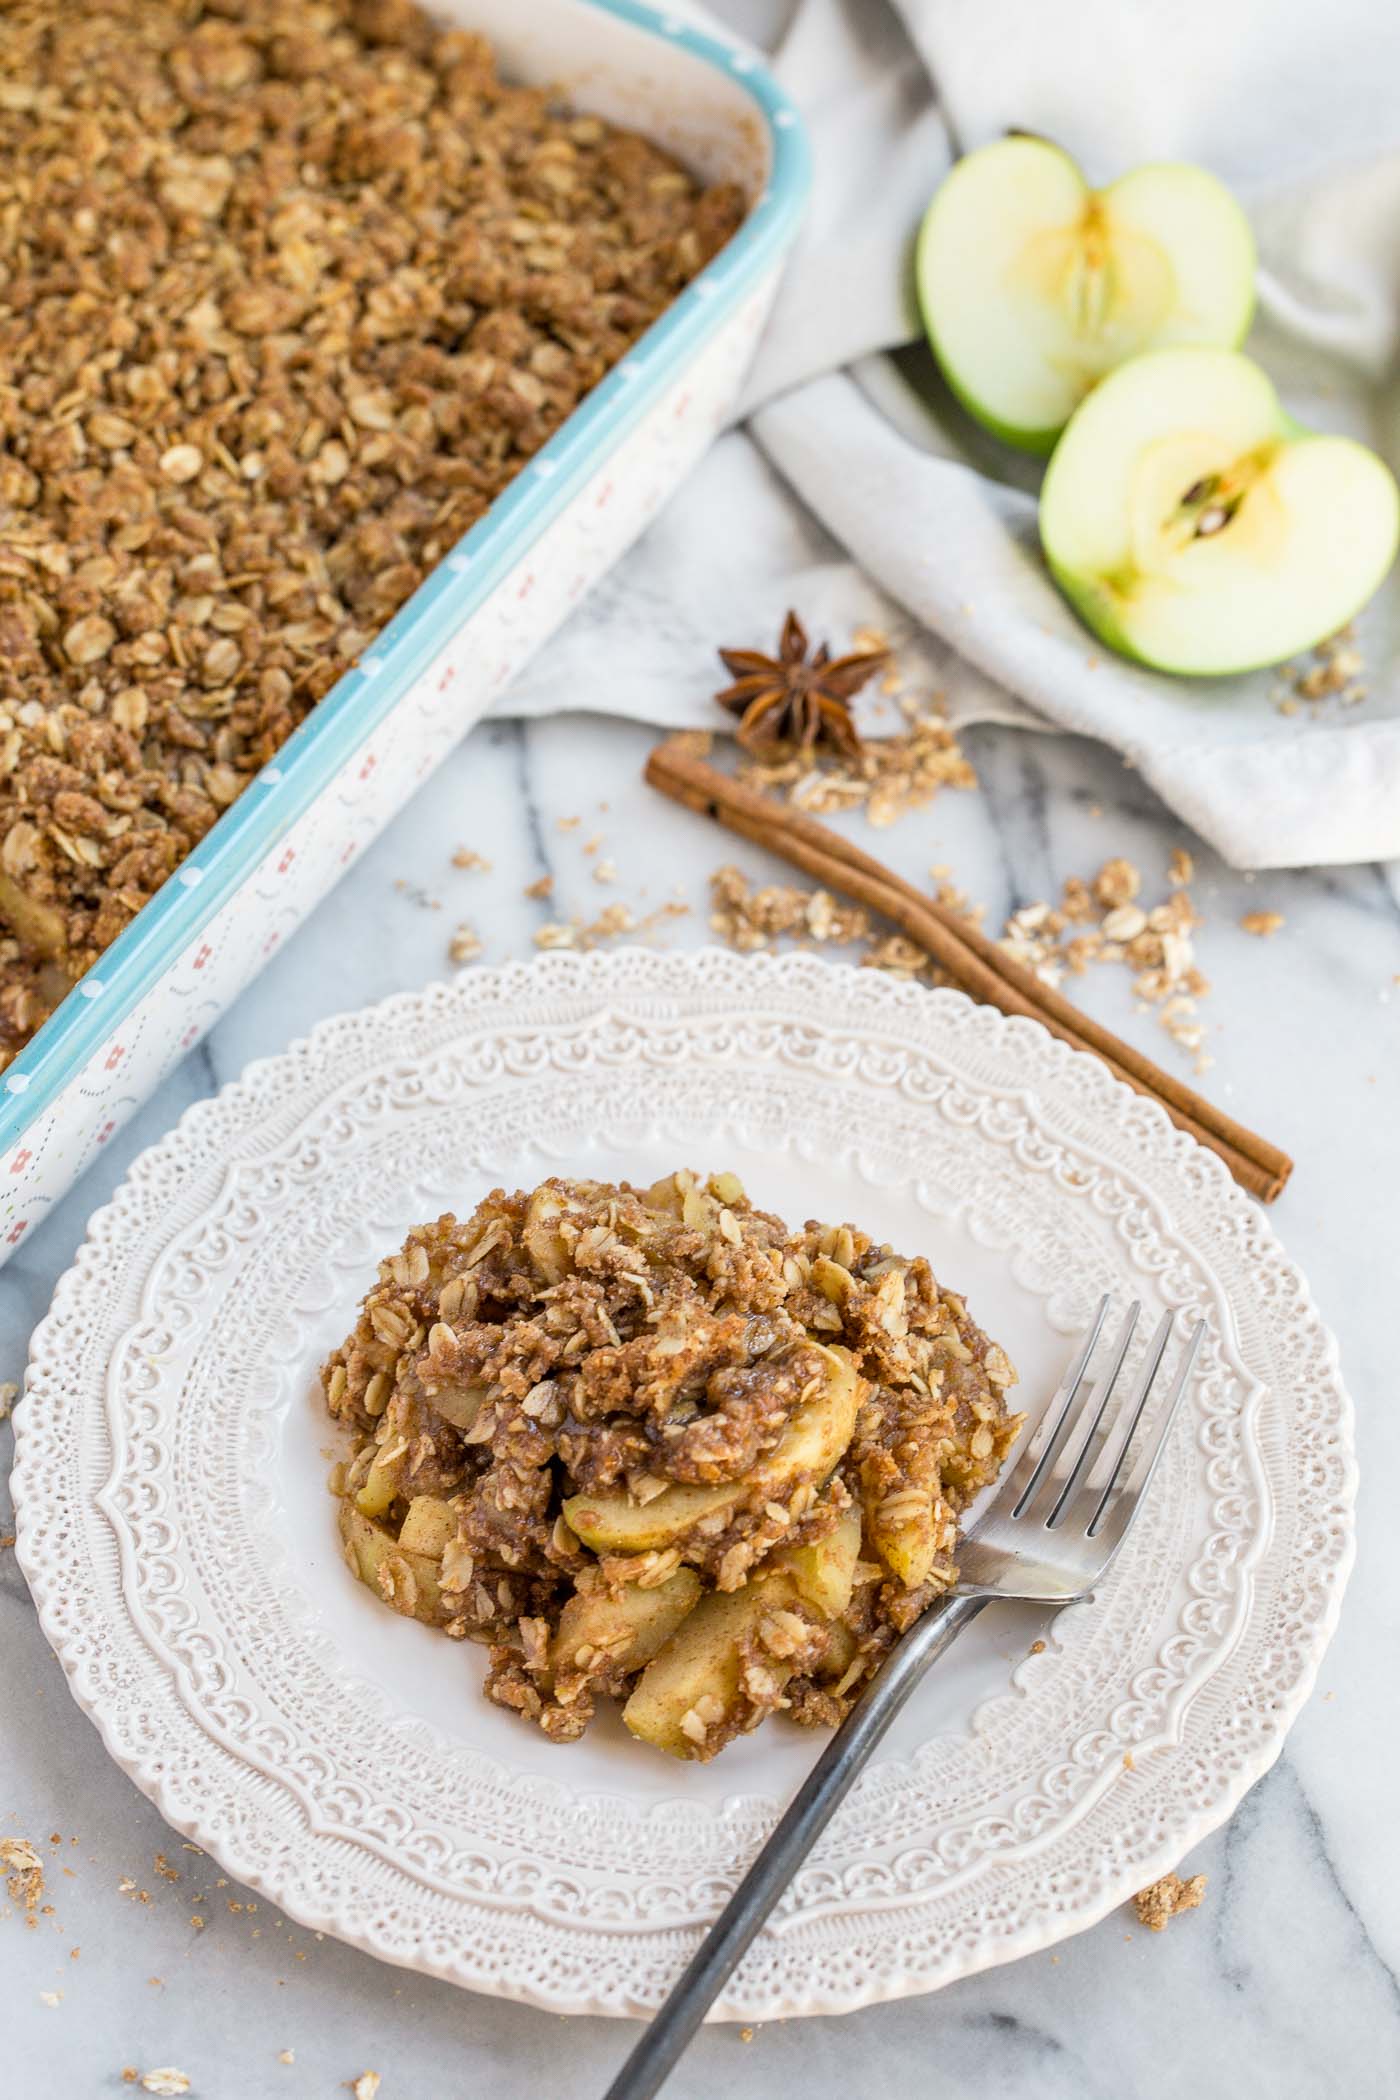 a classic apple crisp updated with the warm flavors of chai, this chai spiced apple crisp is loaded with chai flavor! crisp granny smith apples tossed in a chai spice blend of cinnamon, cardamom, nutmeg, ginger & allspice & baked under a generous layer of homemade crisp. the perfect cozy fall dessert to celebrate all things autumn (especially served warm with a scoop of vanilla ice cream…). #playswellwithbutter #chaispice #applecrisp #chaiapplecrisp #fallbaking #applerecipes